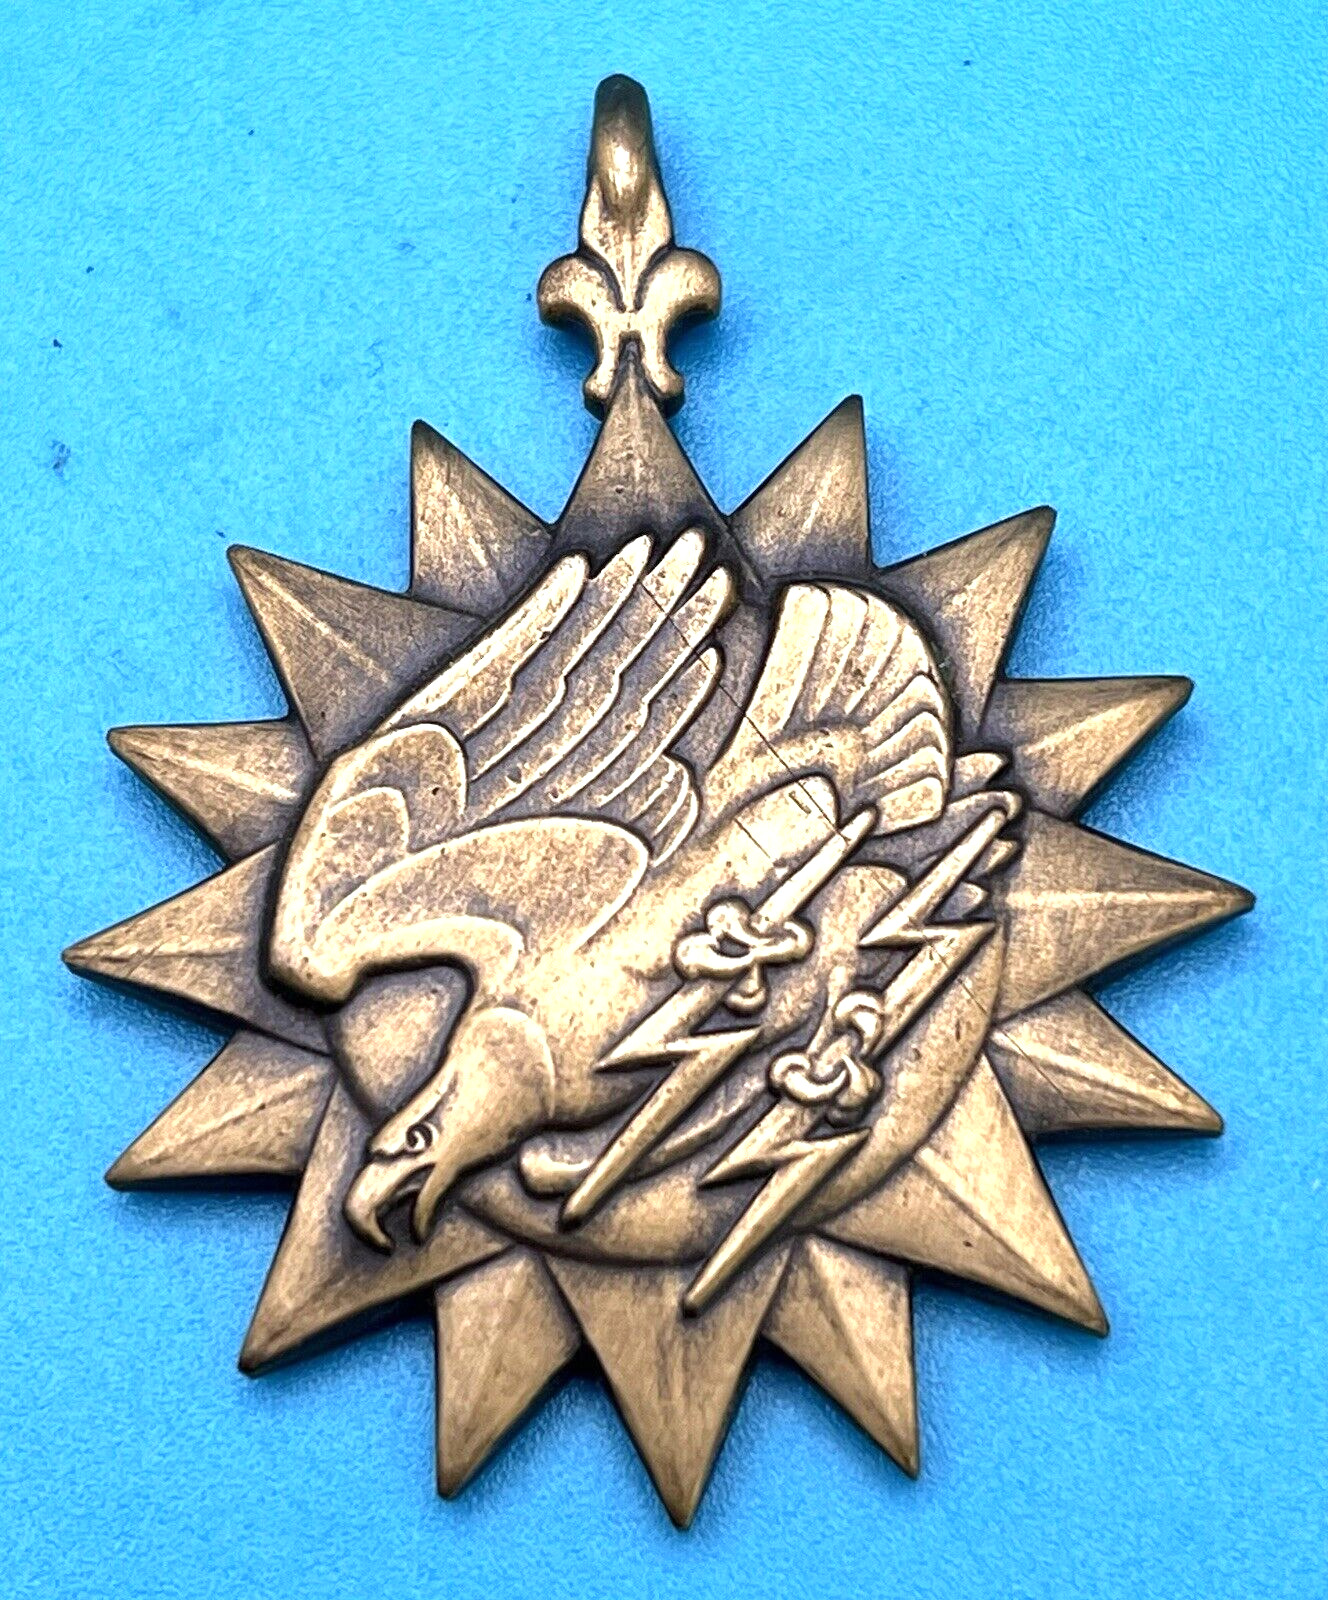 WW2 Vintage Military US Army Air Corps Bronze Medal Eagle with Lightning Bolts